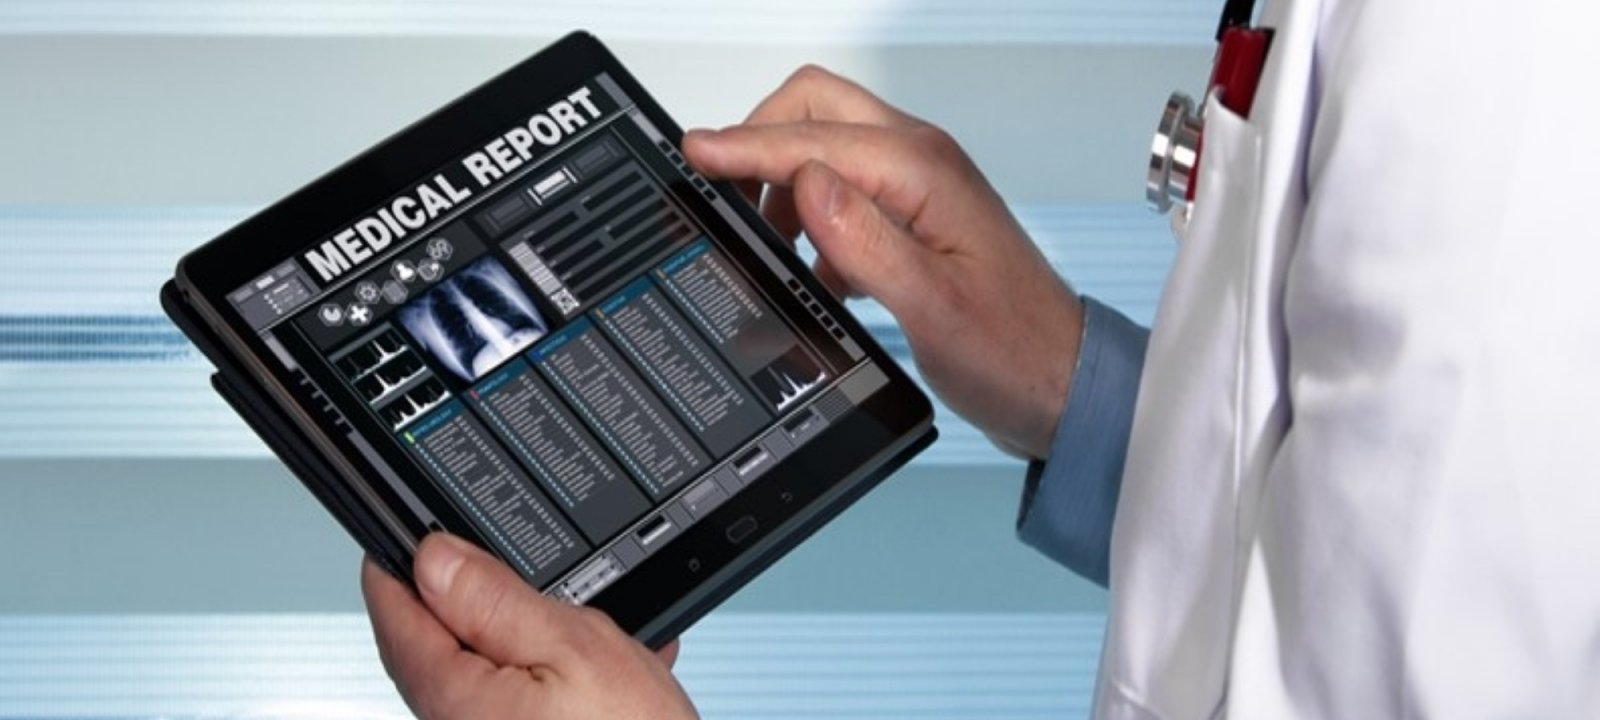 A doctor looking at an electronic health record on a tablet.